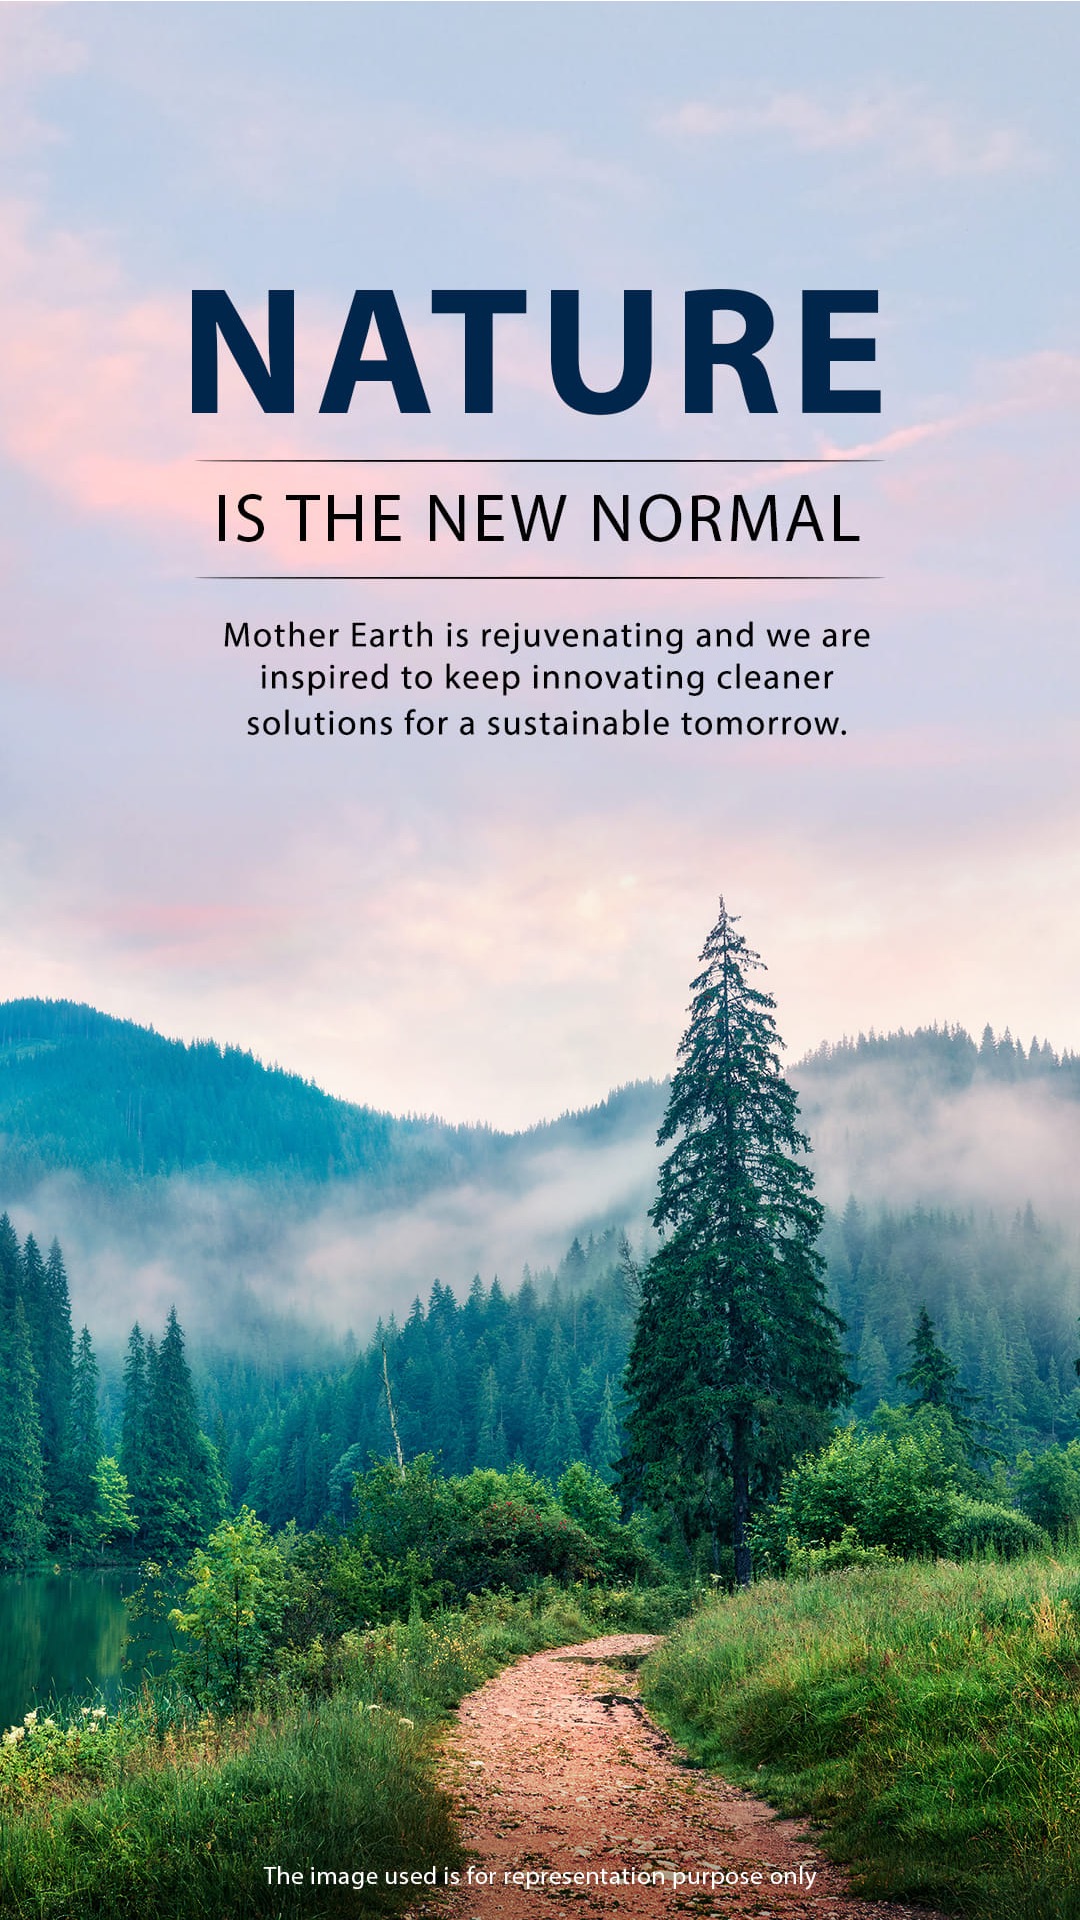 Nature is the new normal